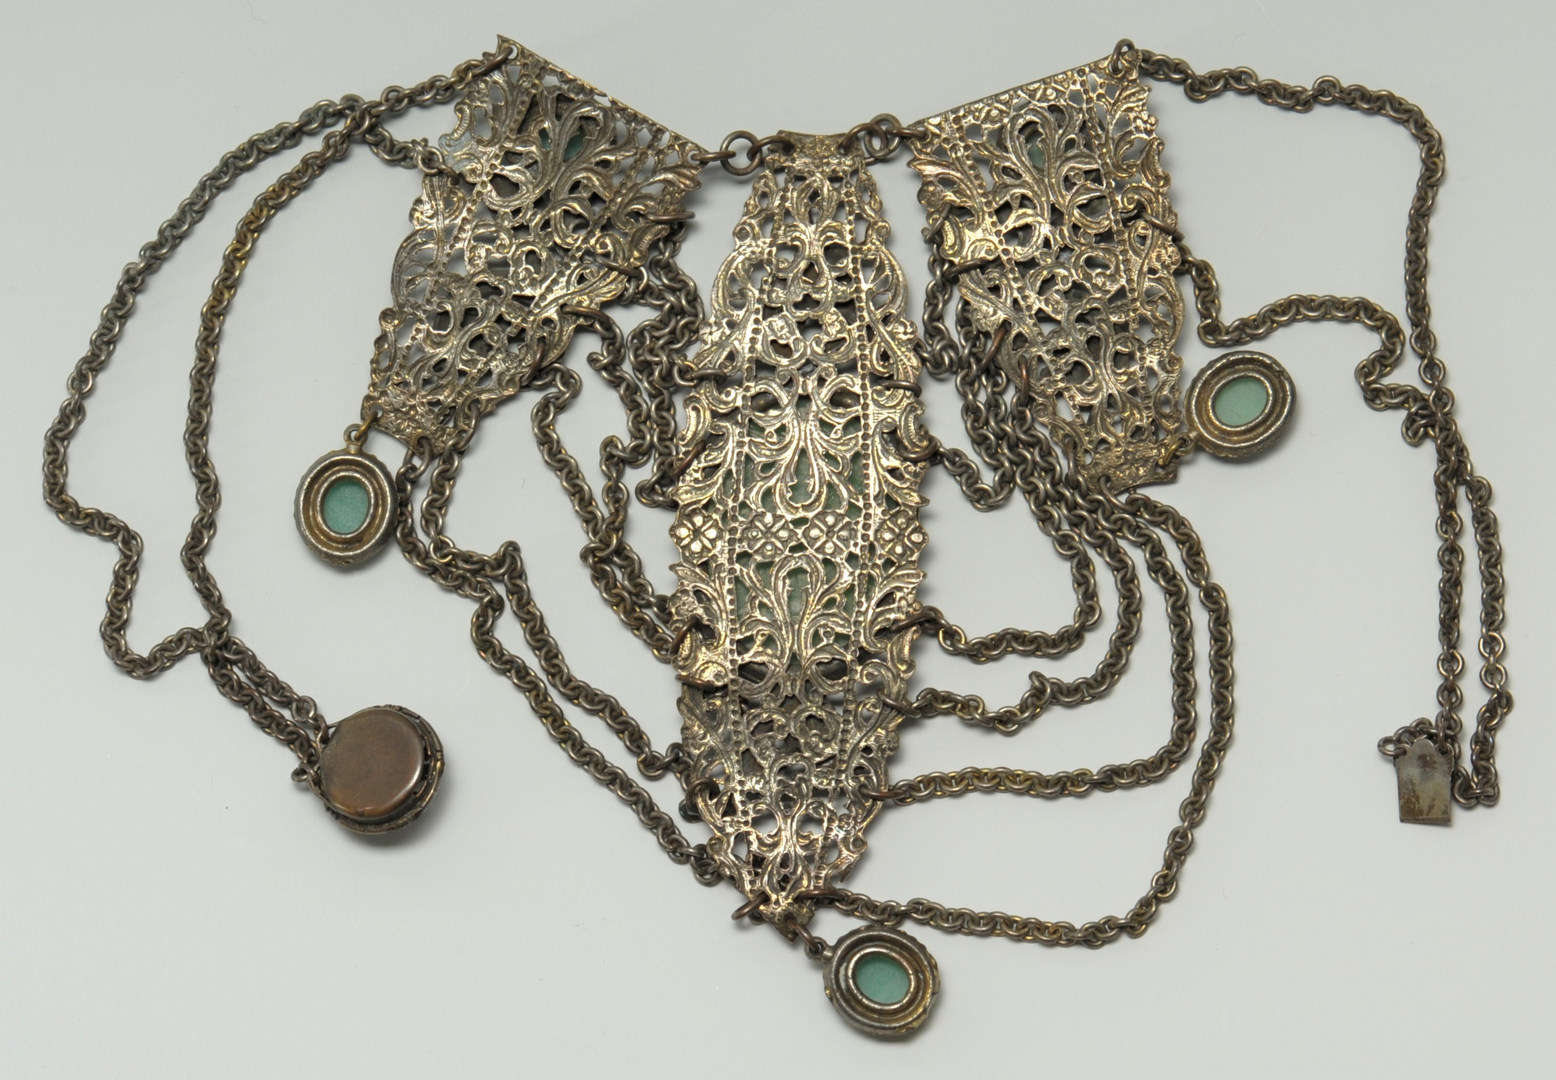 Lot 214: Chinese Jade Dragon Necklace and Cloisonne Brooch